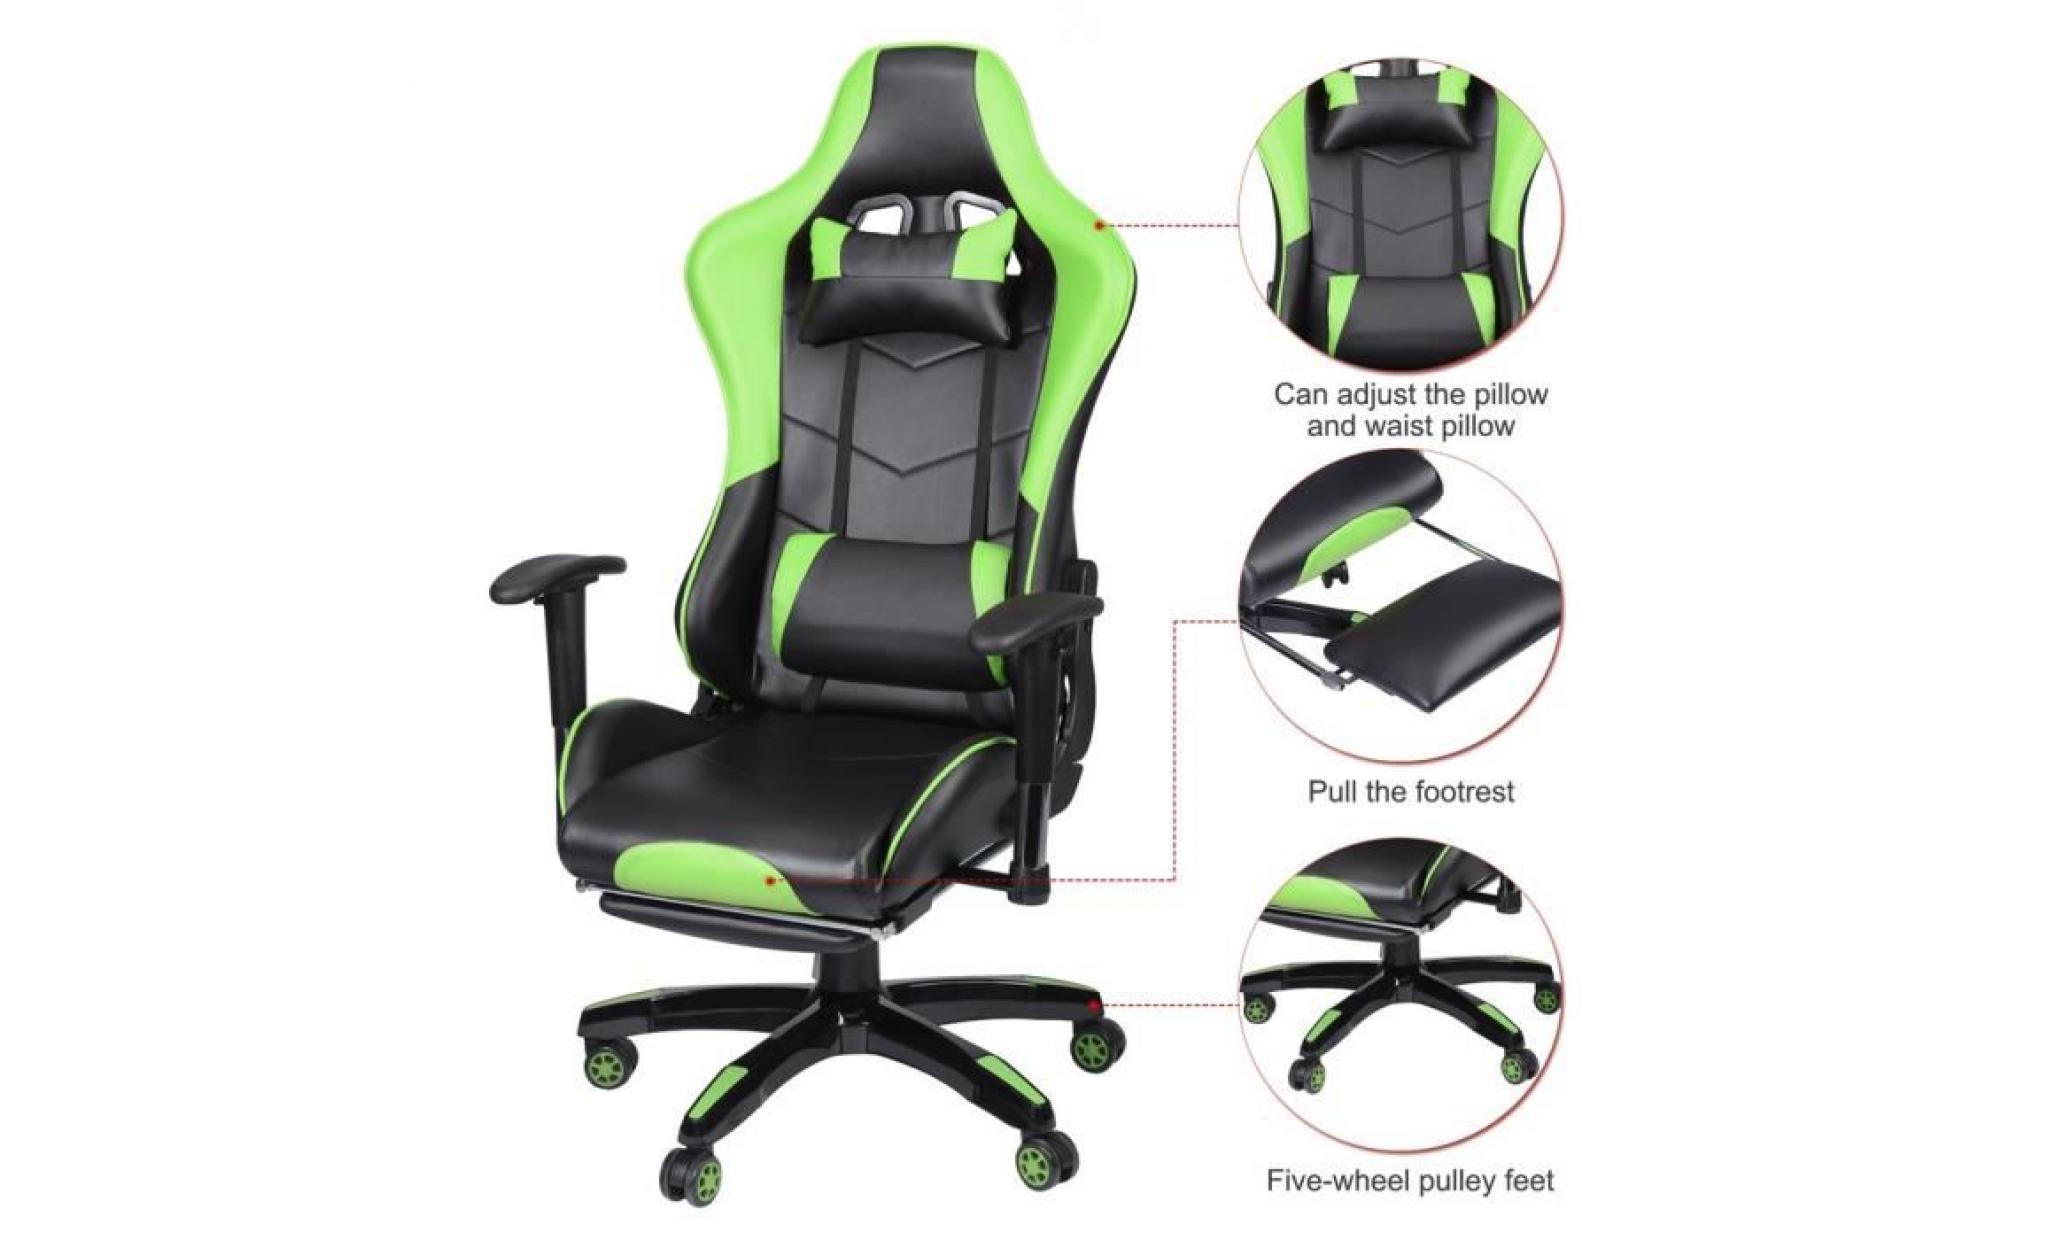 fauteuil gaming avec repose pied jeux video siege gaming 360 vert pas cher